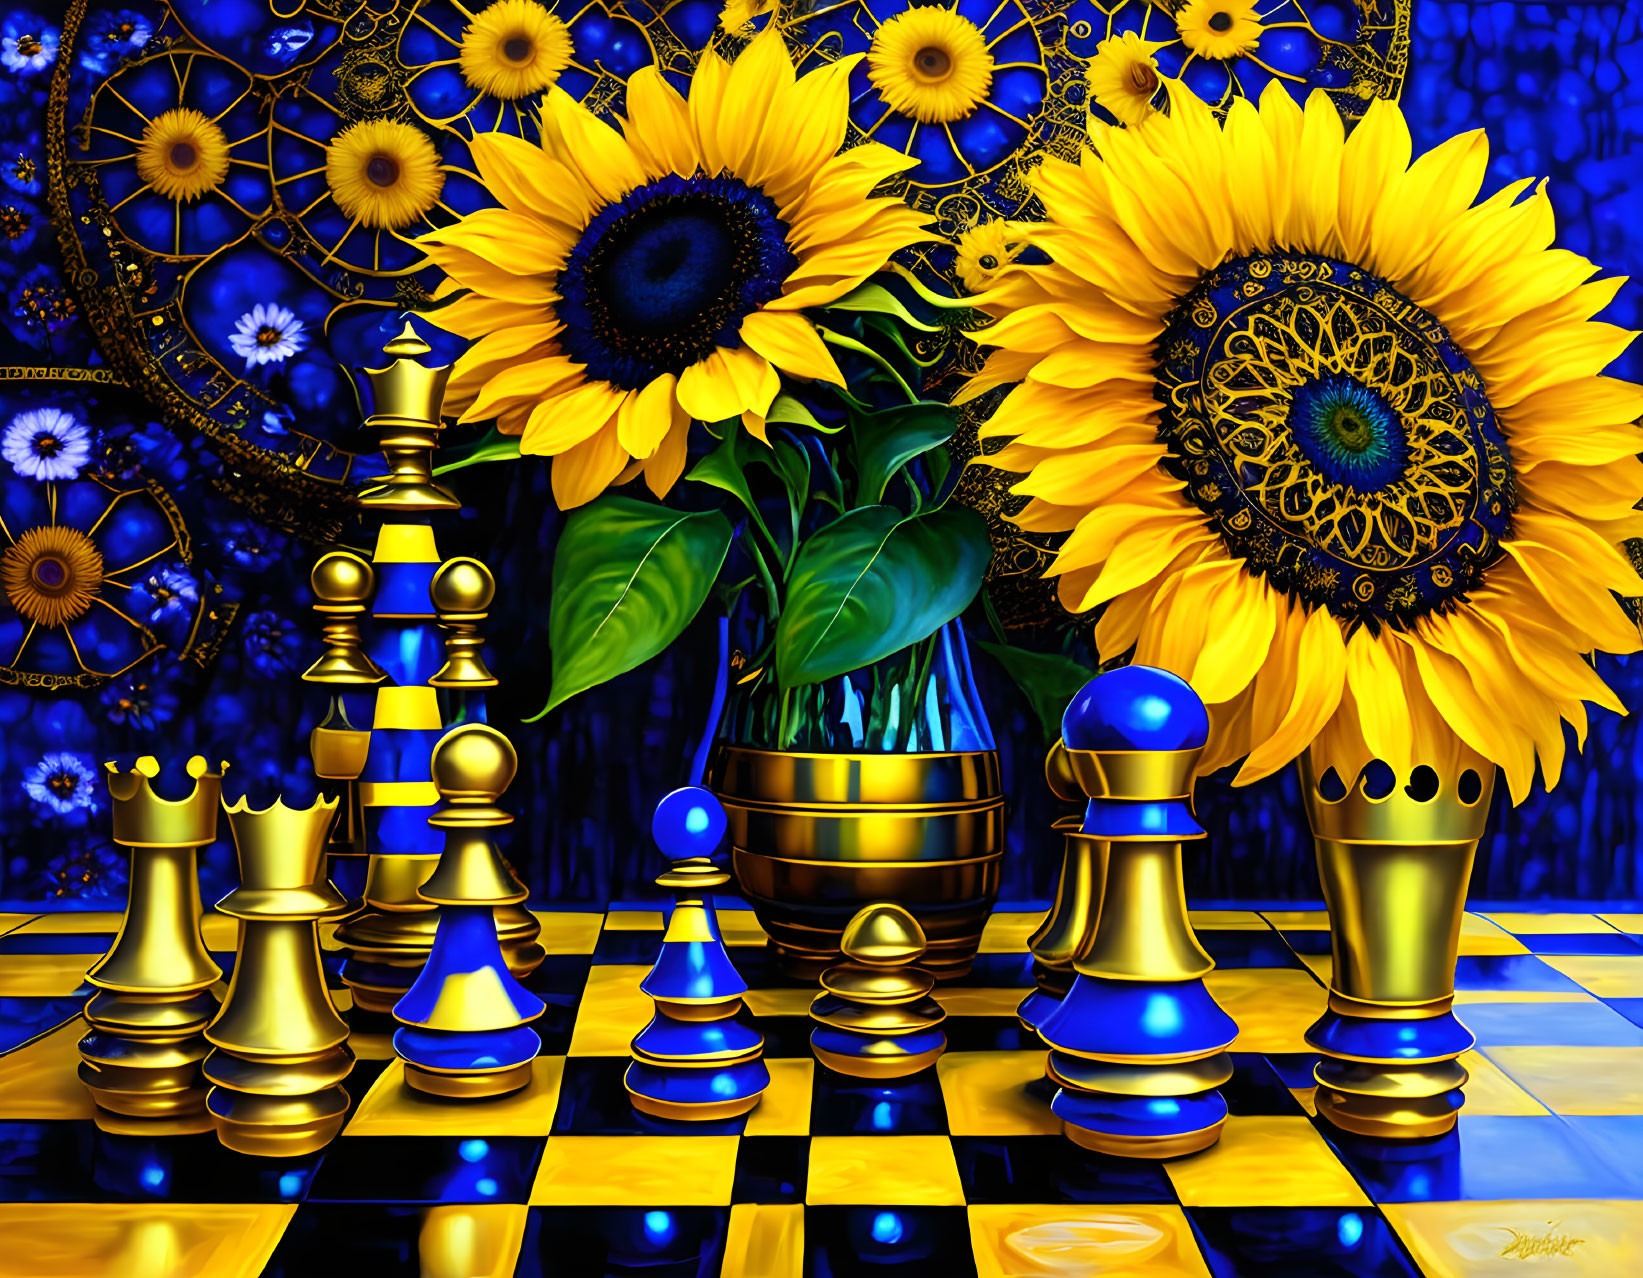 Artwork of Sunflowers, Chess Pieces, and Gears on Blue Background